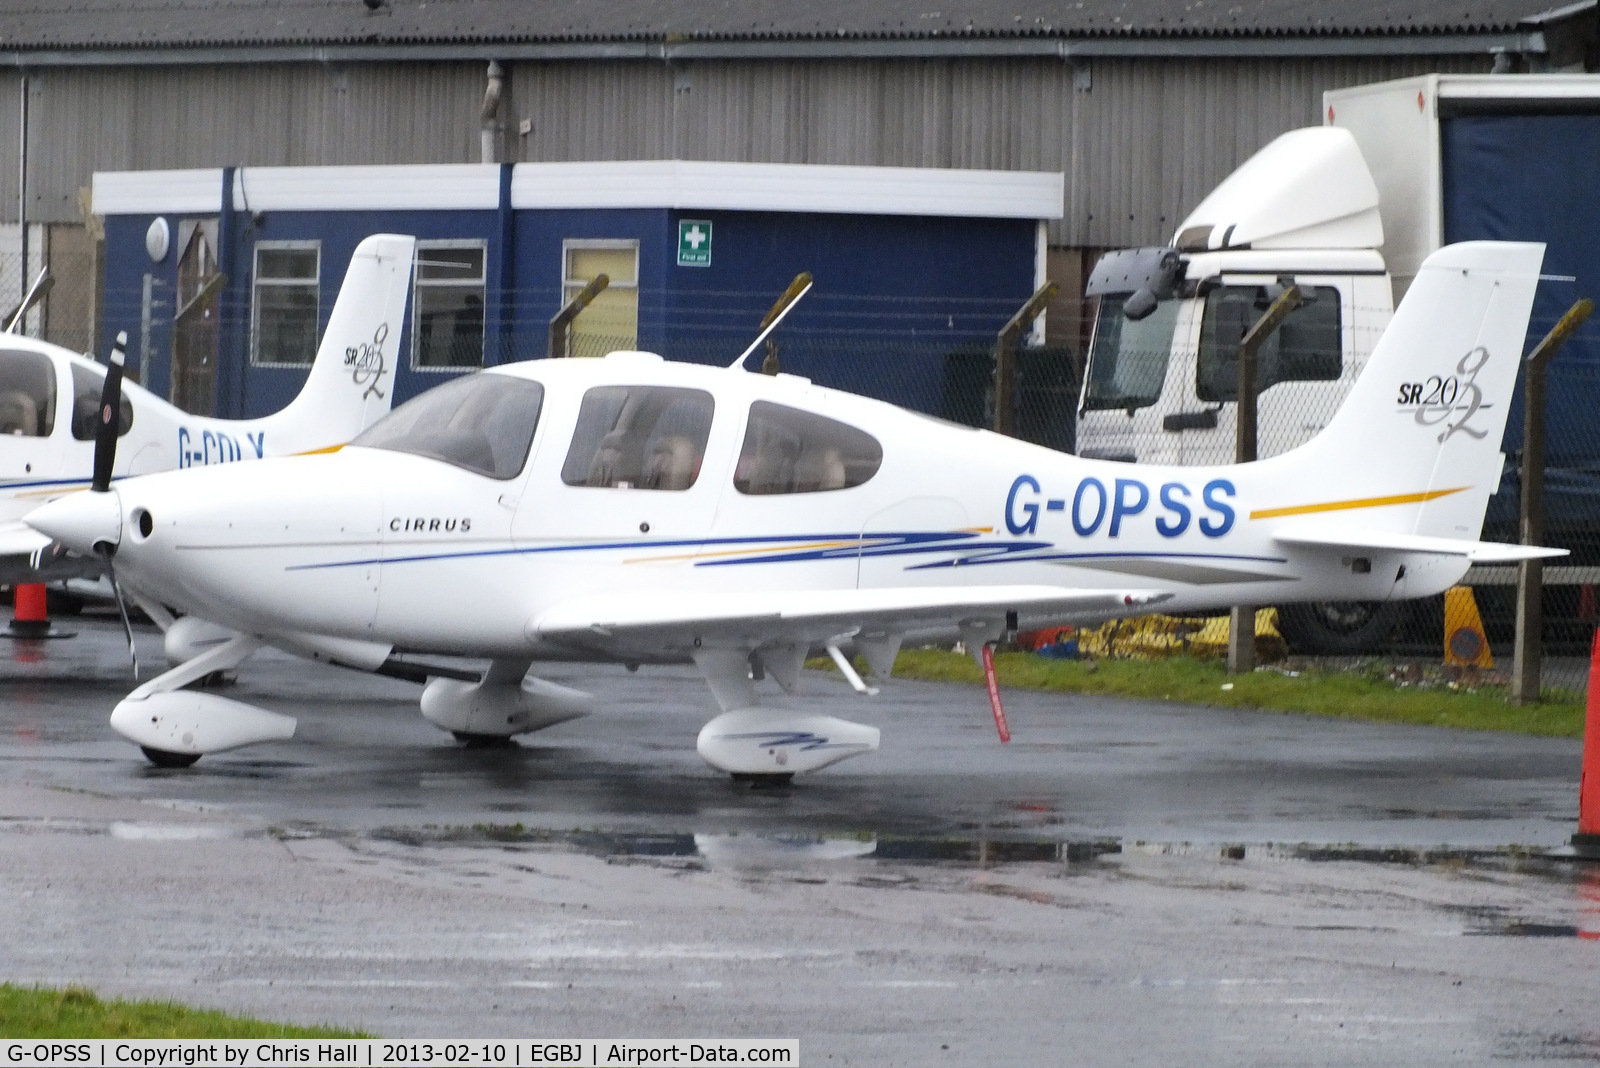 G-OPSS, 2004 Cirrus SR20 G2 C/N 1458, at Gloucestershire Airport